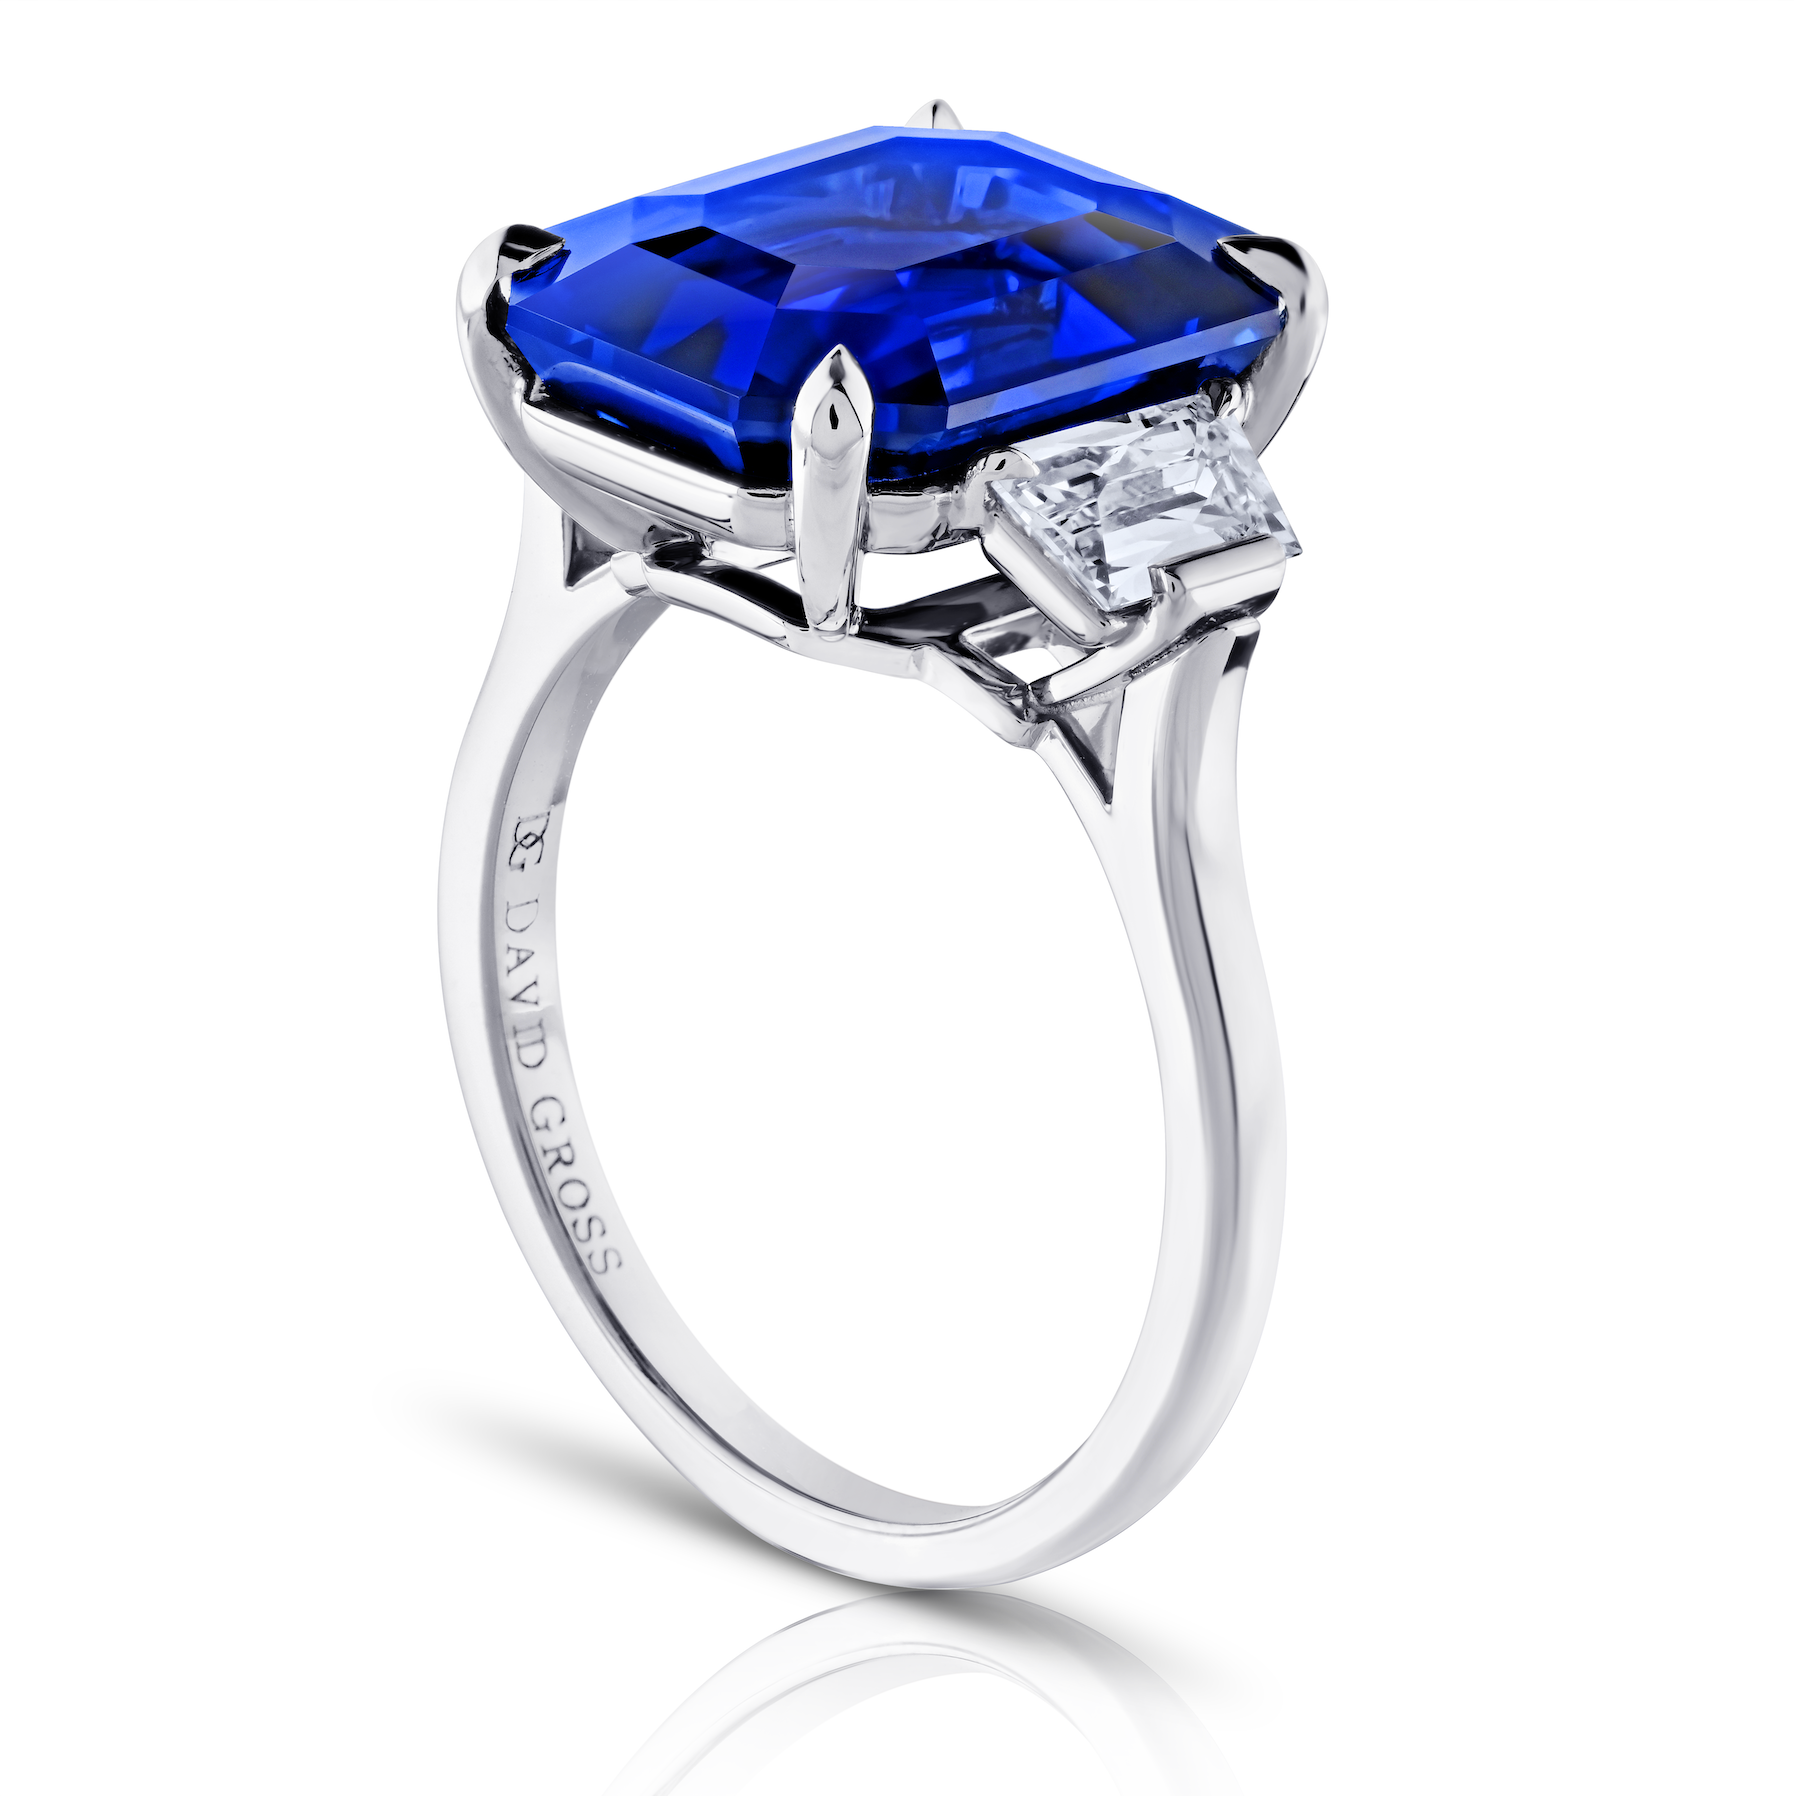 Sapphire ring from David Gross Group